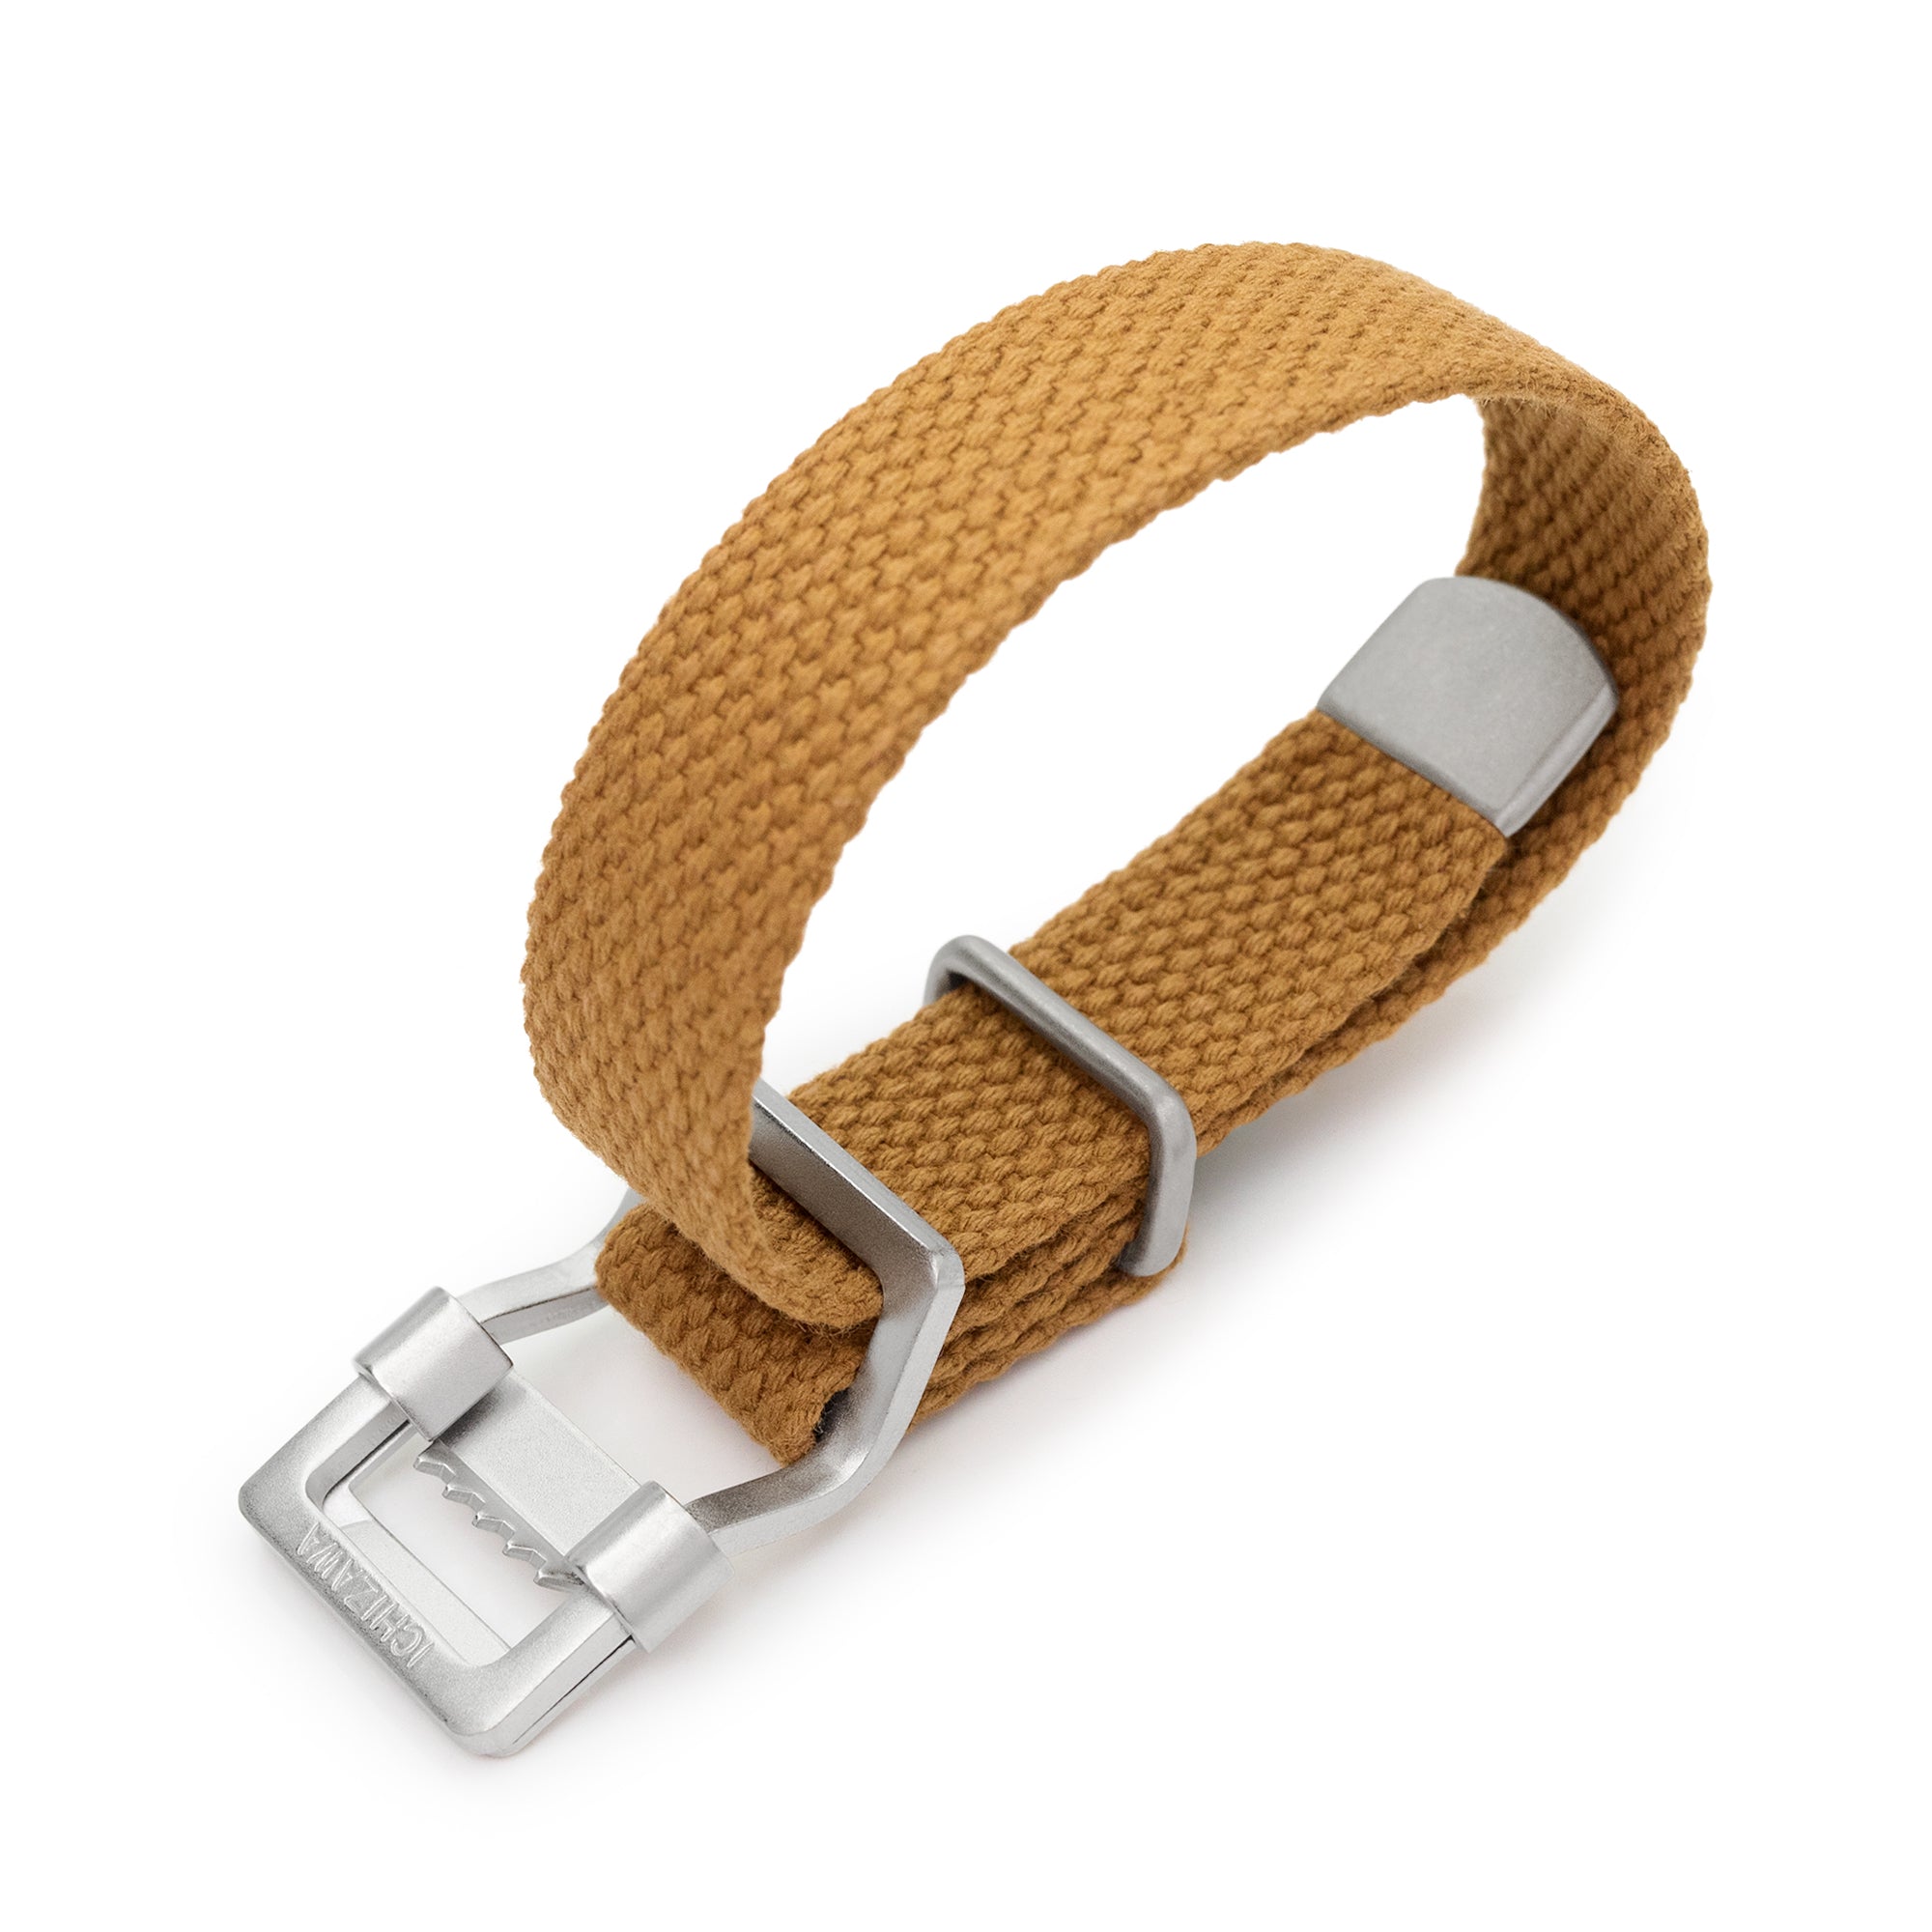 19mm Japanese Heavy Cotton Canvas Watch Strap, Light Brown Strapcode watch bands